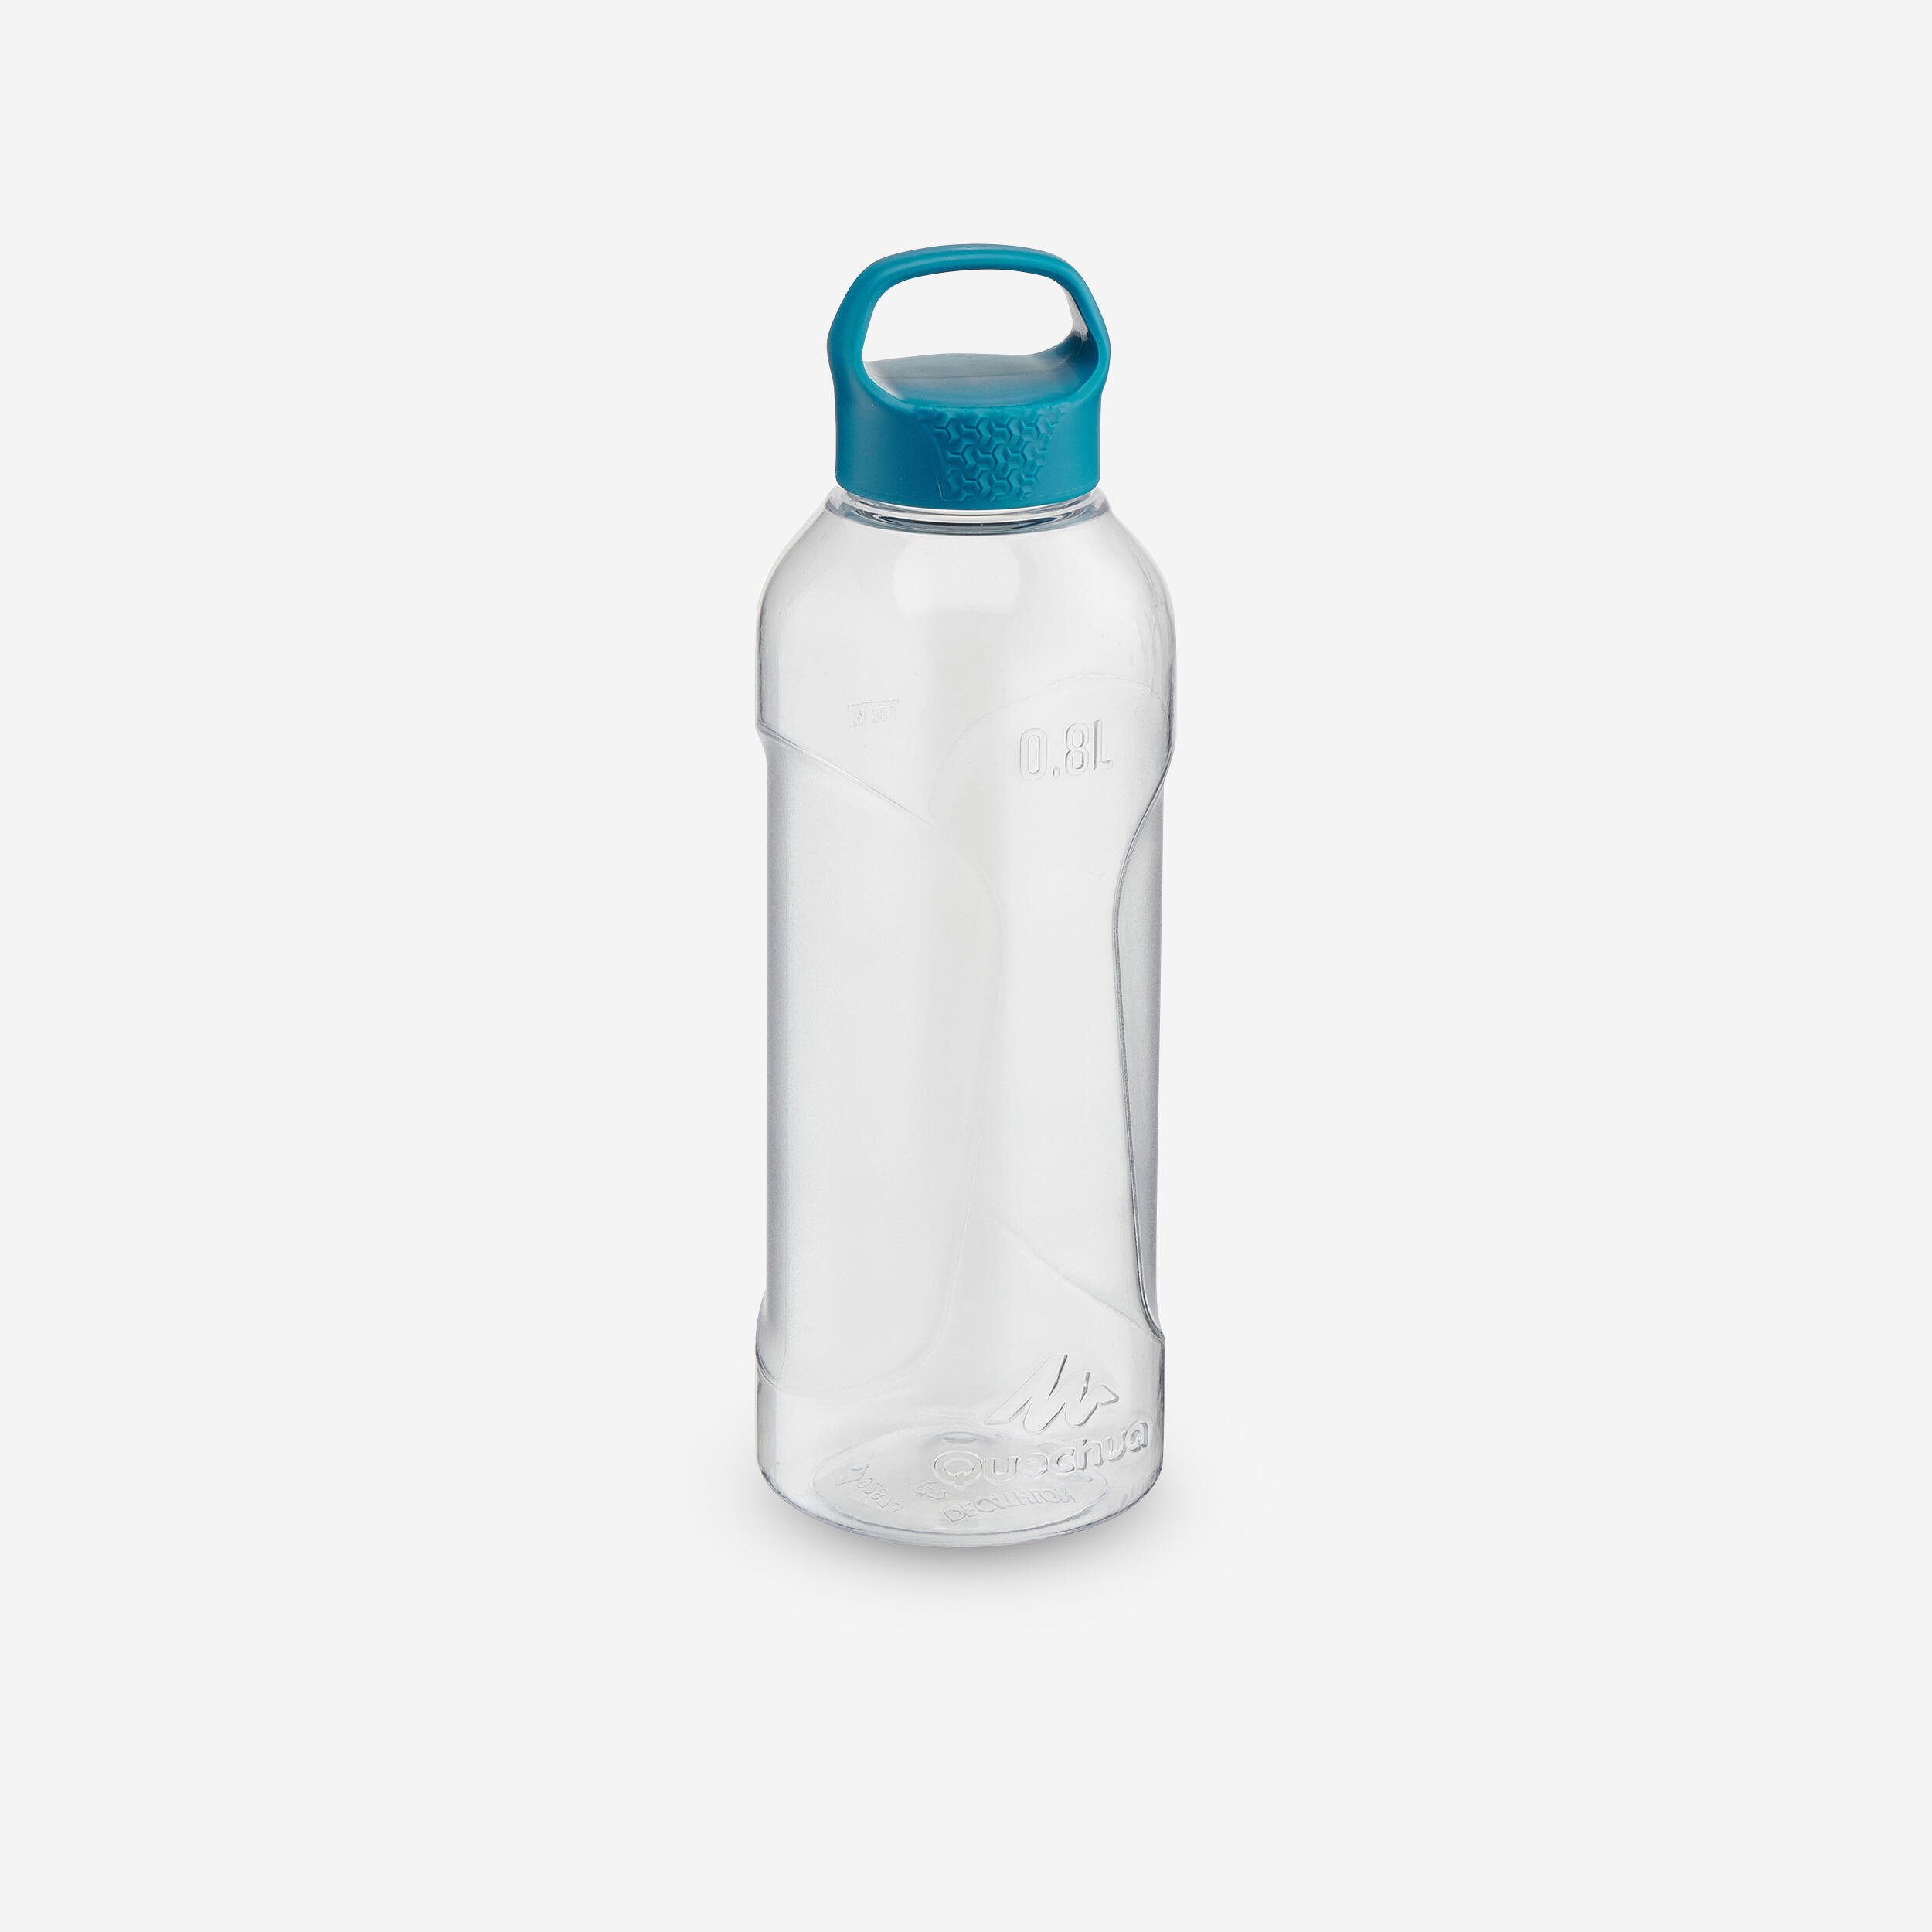 0.8 L Plastic Hiking Water Bottle - MH 100